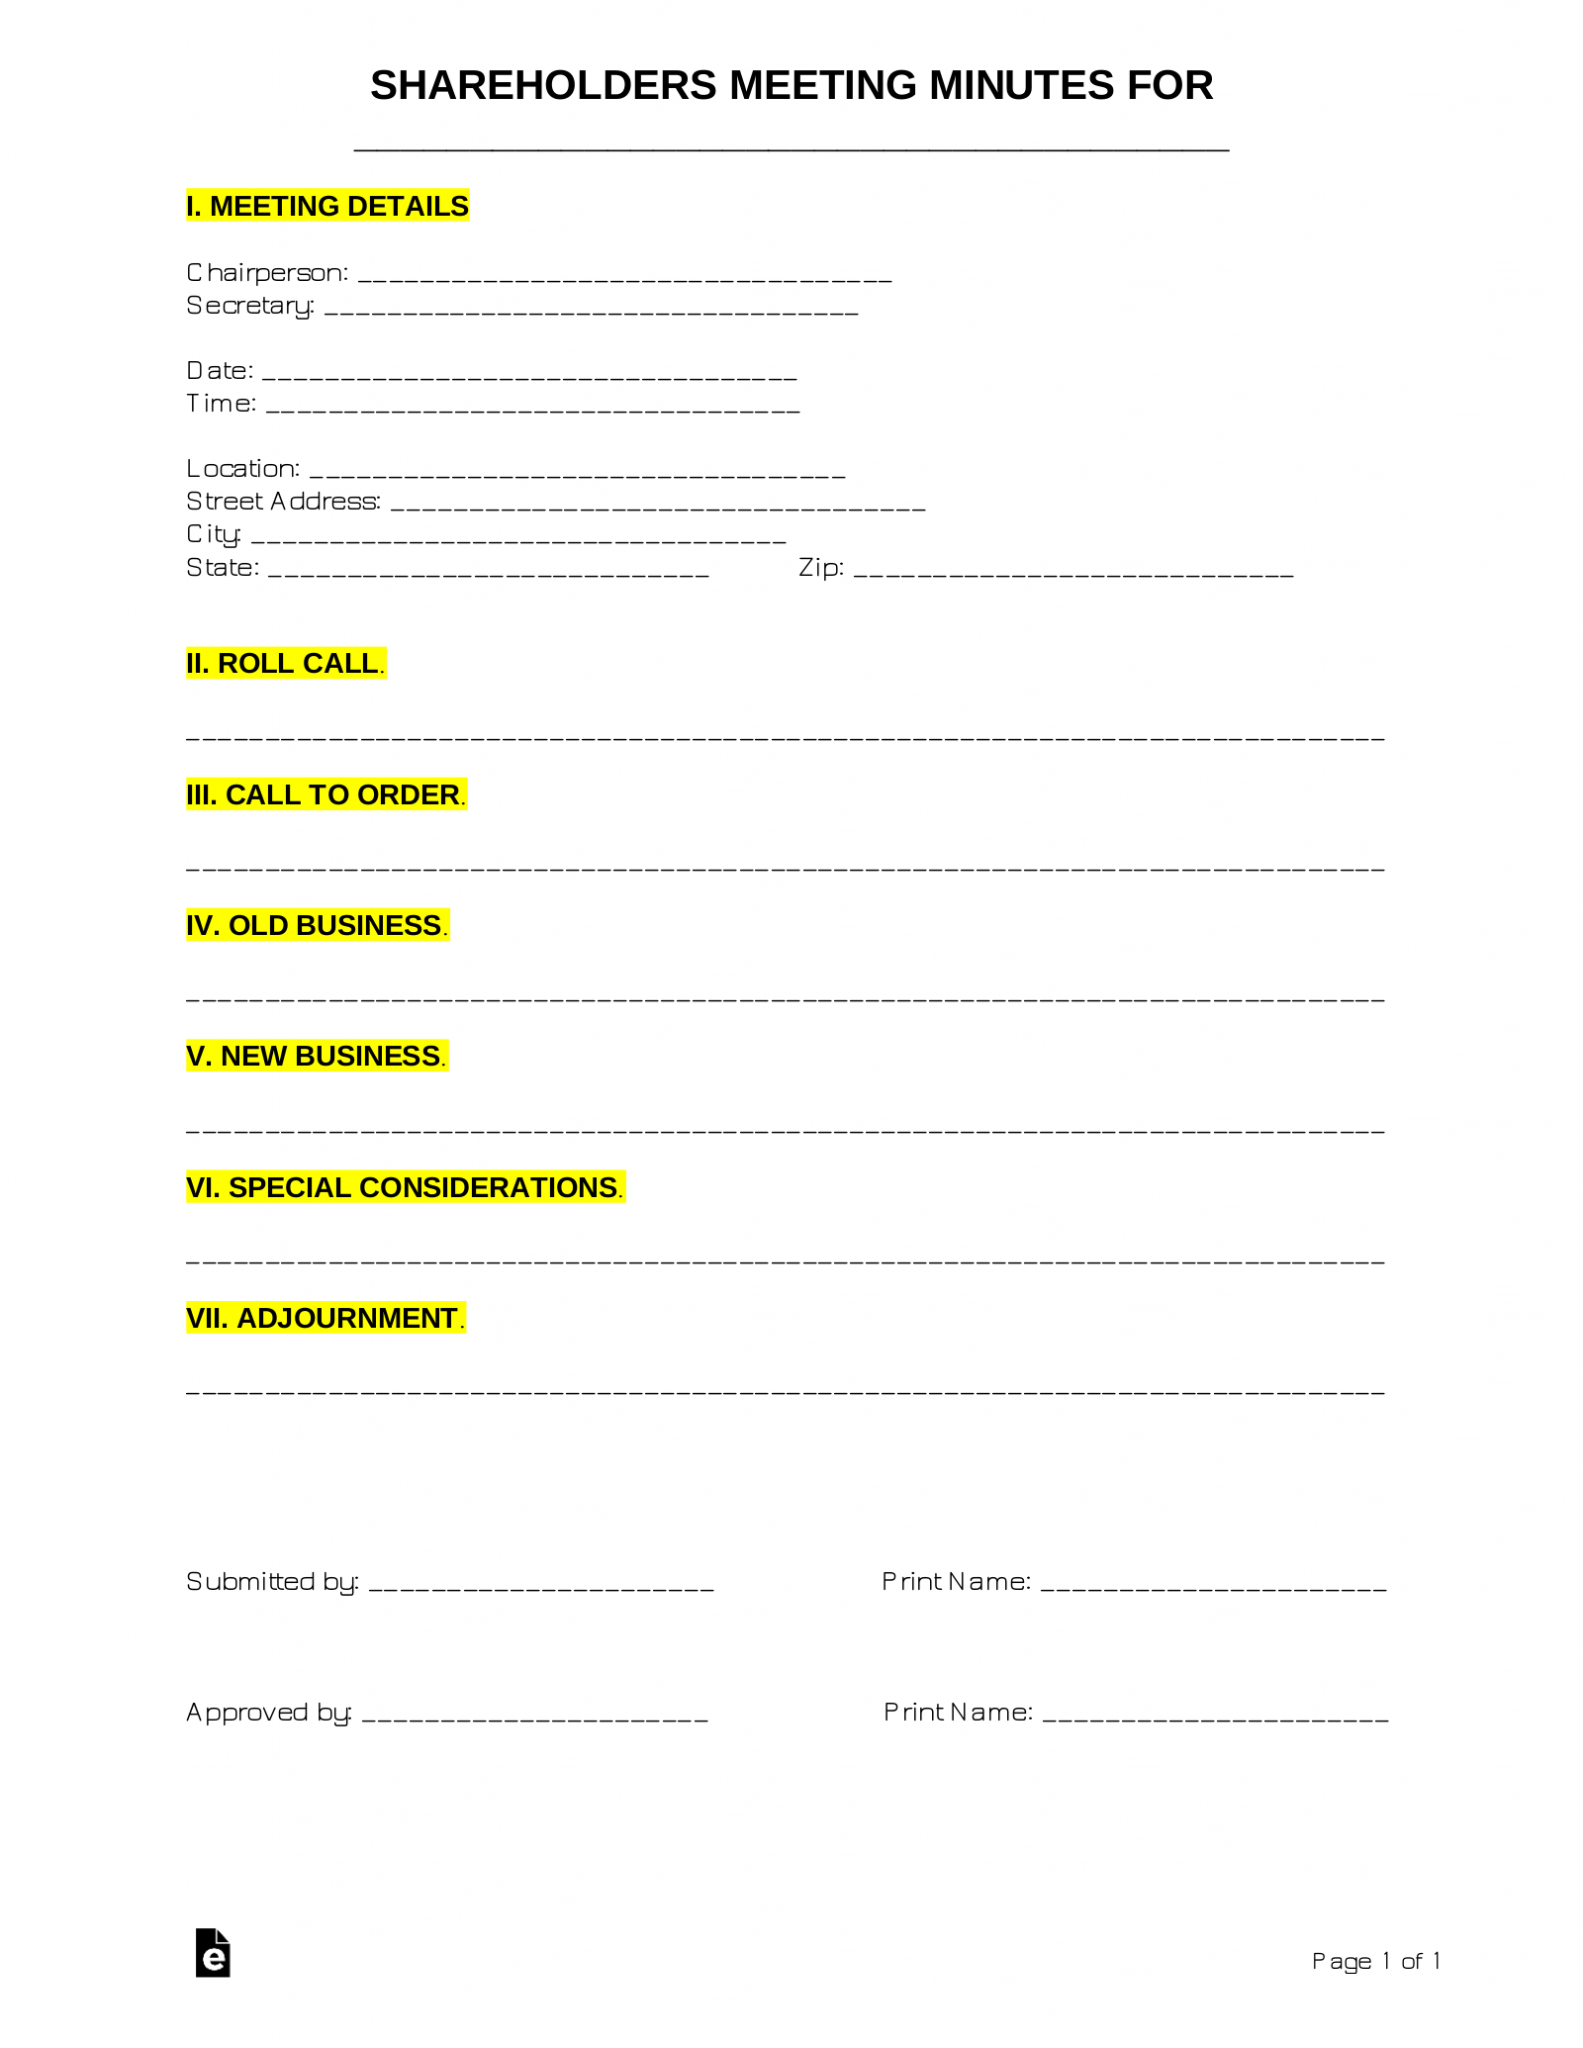 free-shareholders-meeting-minutes-template-sample-pdf-word-eforms